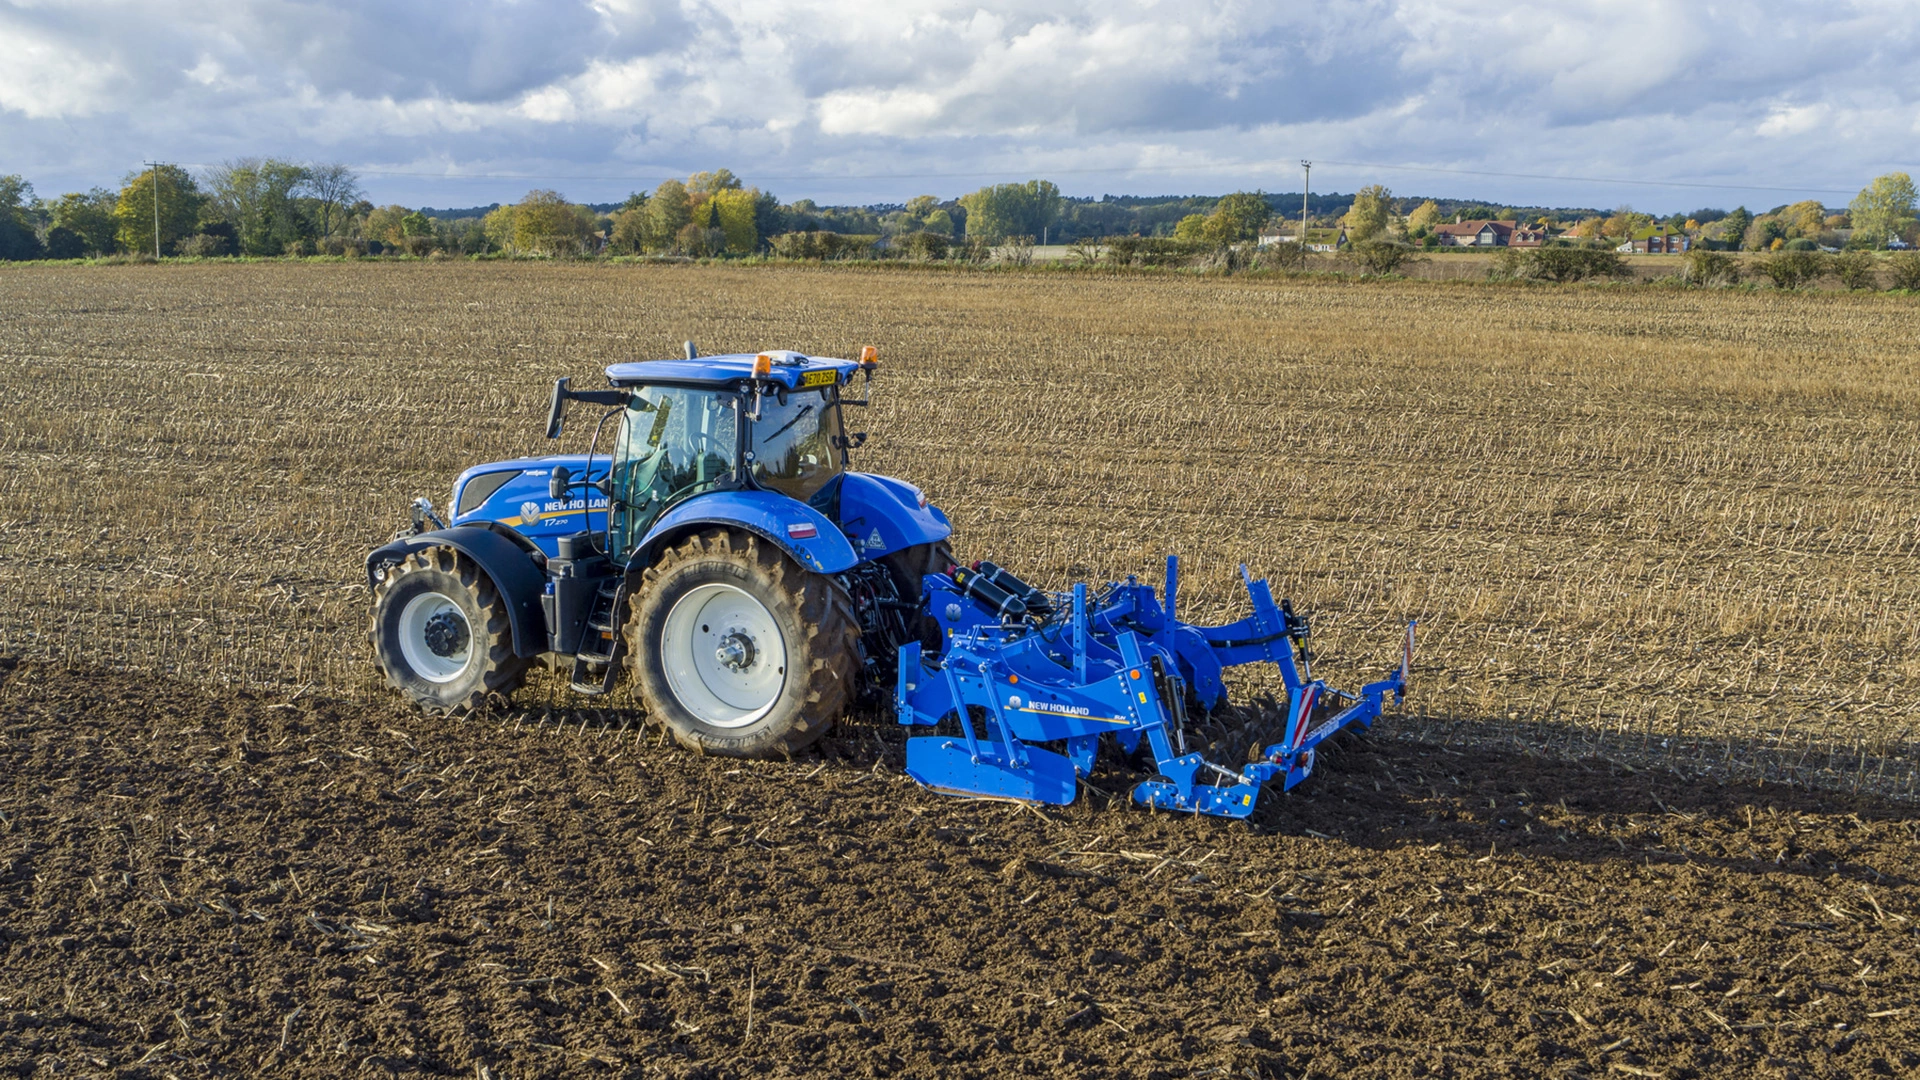 New Holland tractor utilizing SUM & SUH Subsoilers for deep soil aeration and conditioning on agricultural field